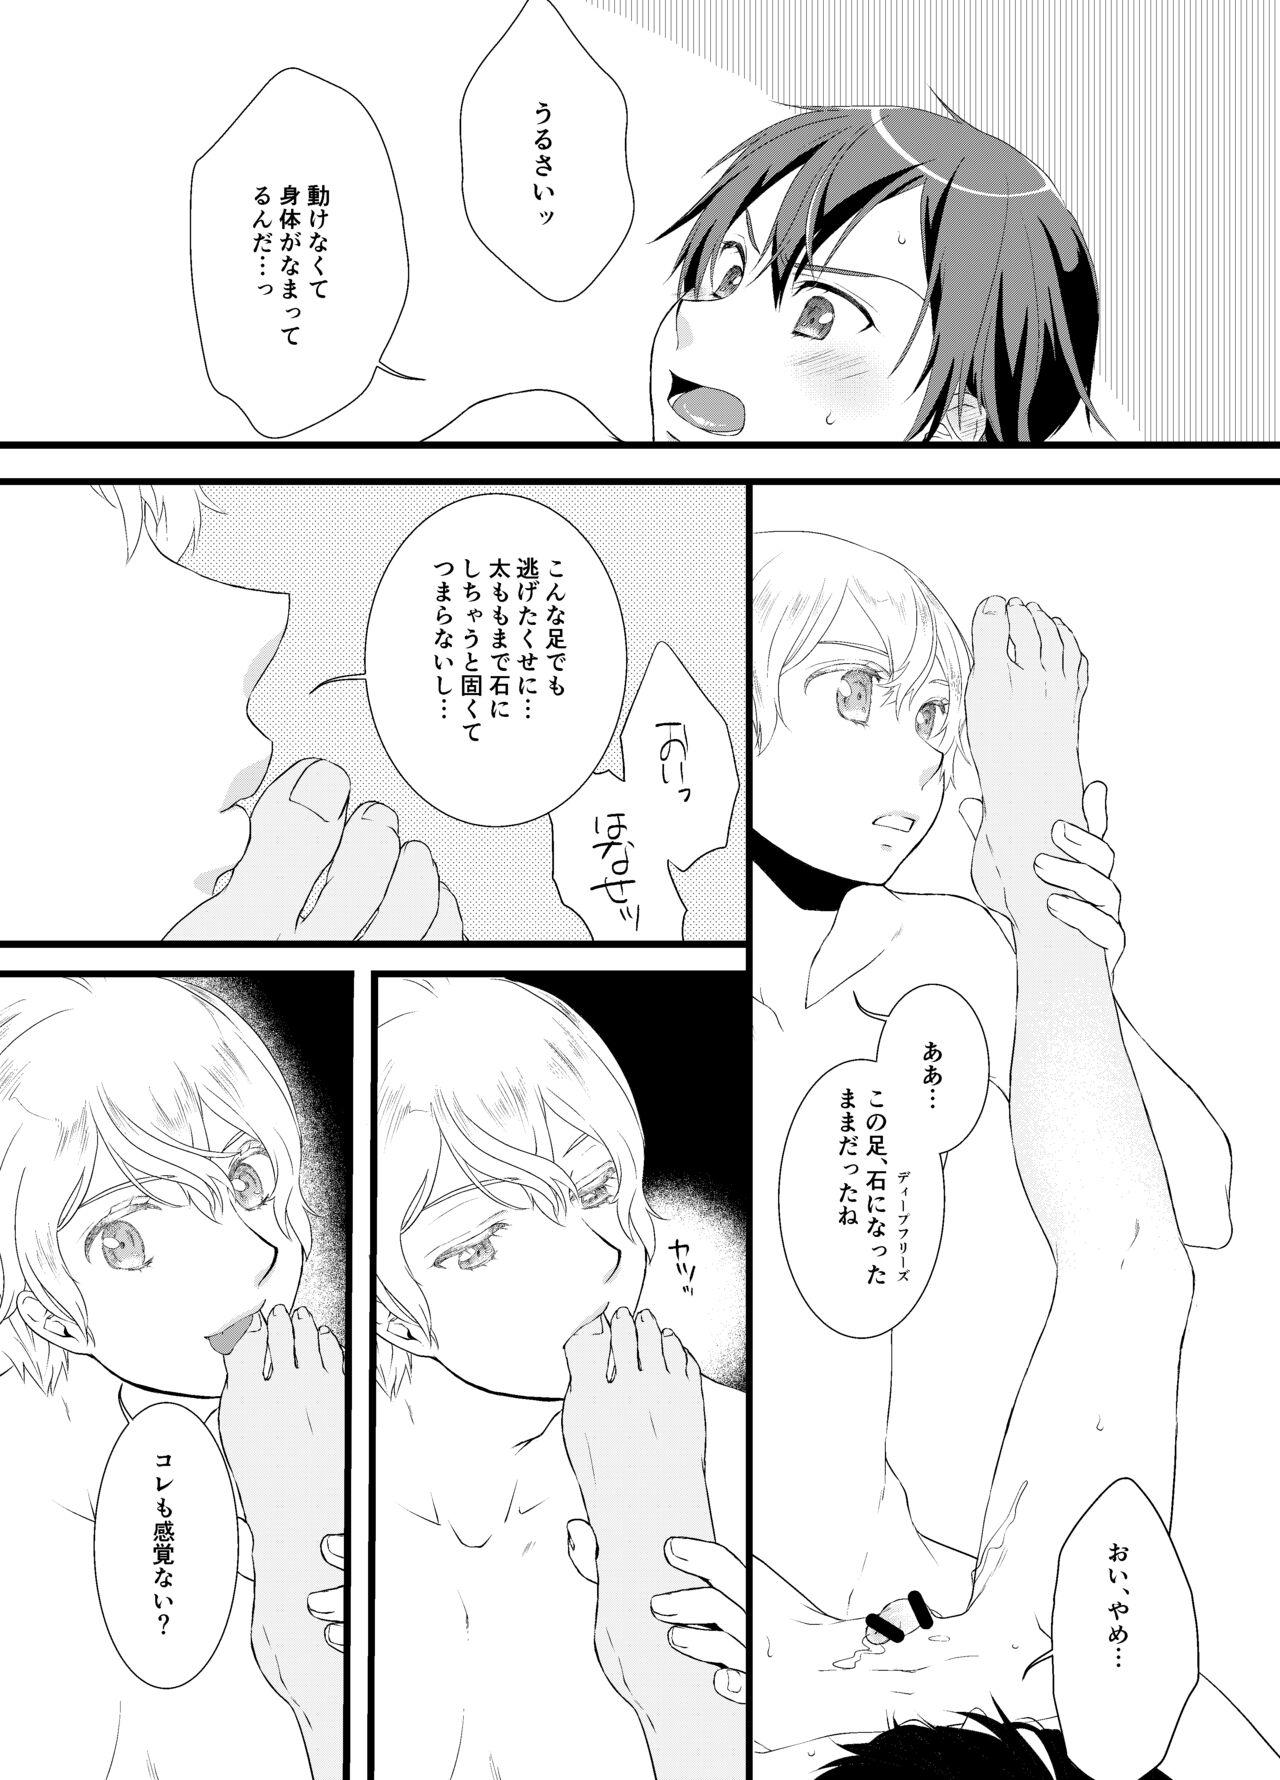 Exotic Horn of fertility - Sword art online Gay Gloryhole - Page 6